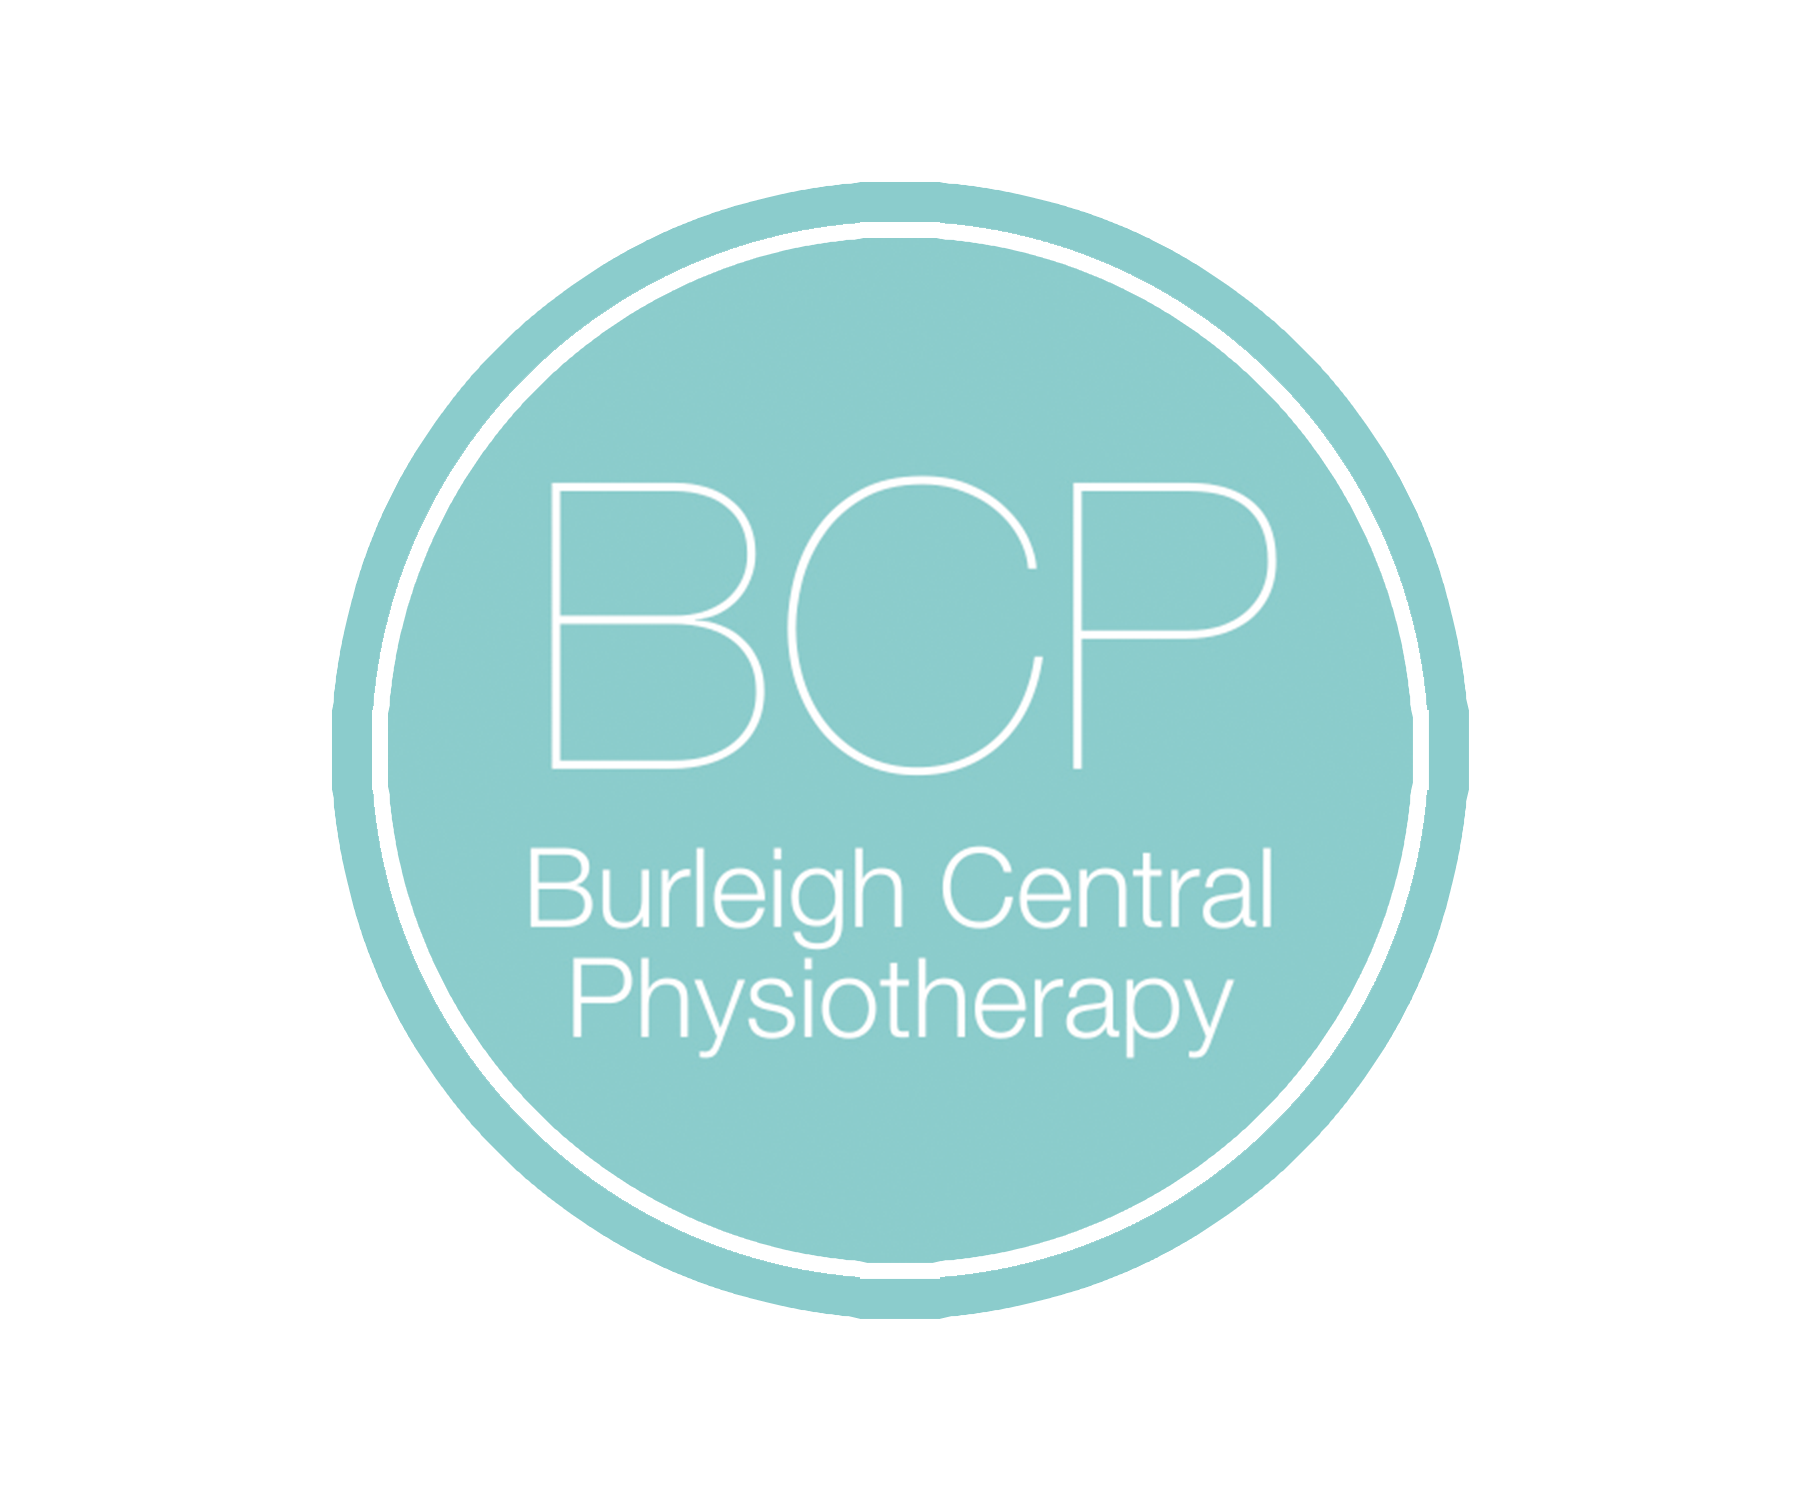 Burleigh Central Physiotherapy